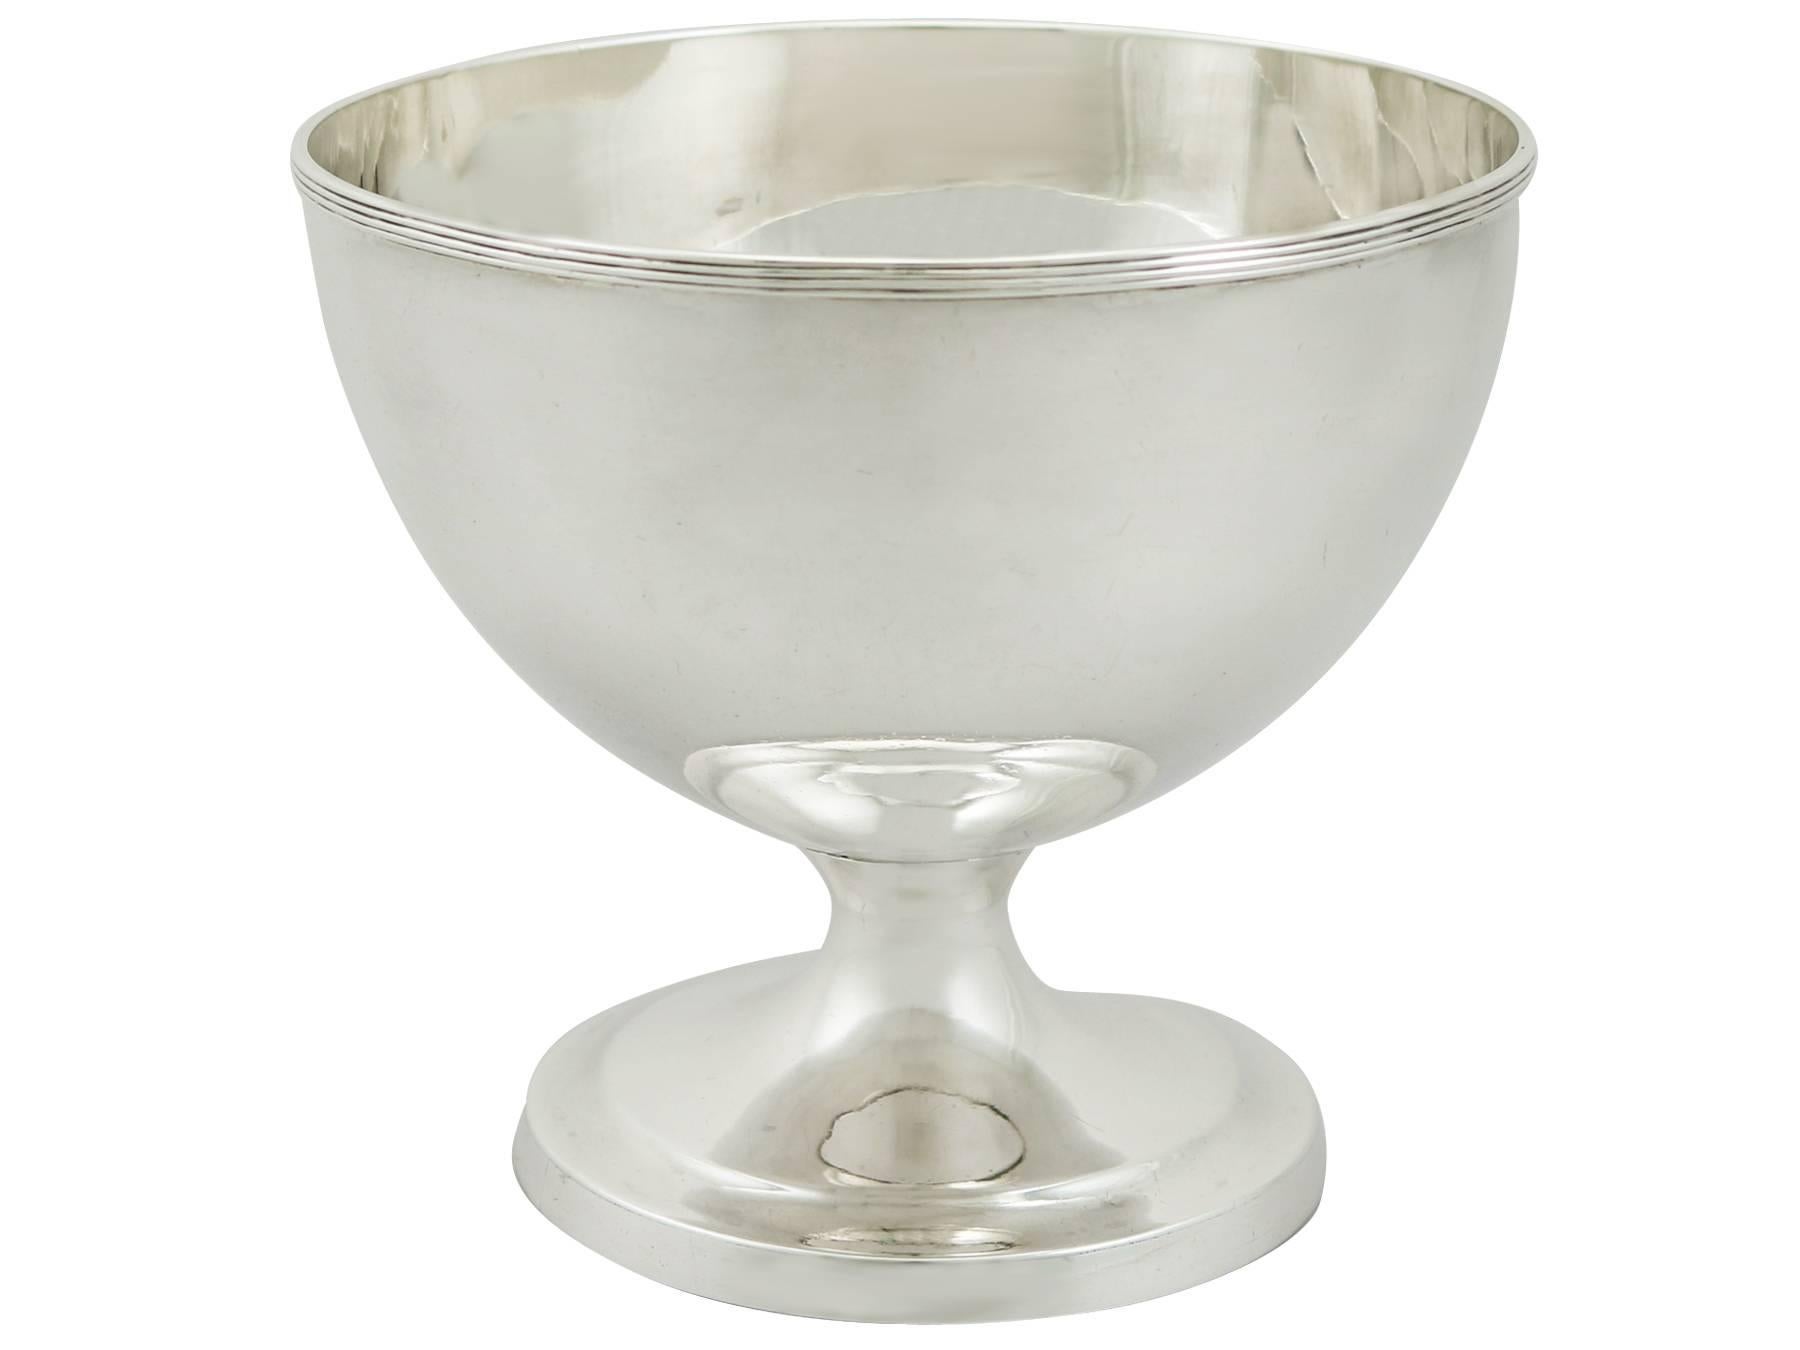 A fine and impressive, large antique George IV Scottish sterling silver sugar/bon bon bowl by William Robertson; an addition to our ornamental silverware collection.

This fine antique George IV Scottish sterling silver sugar bowl has a plain